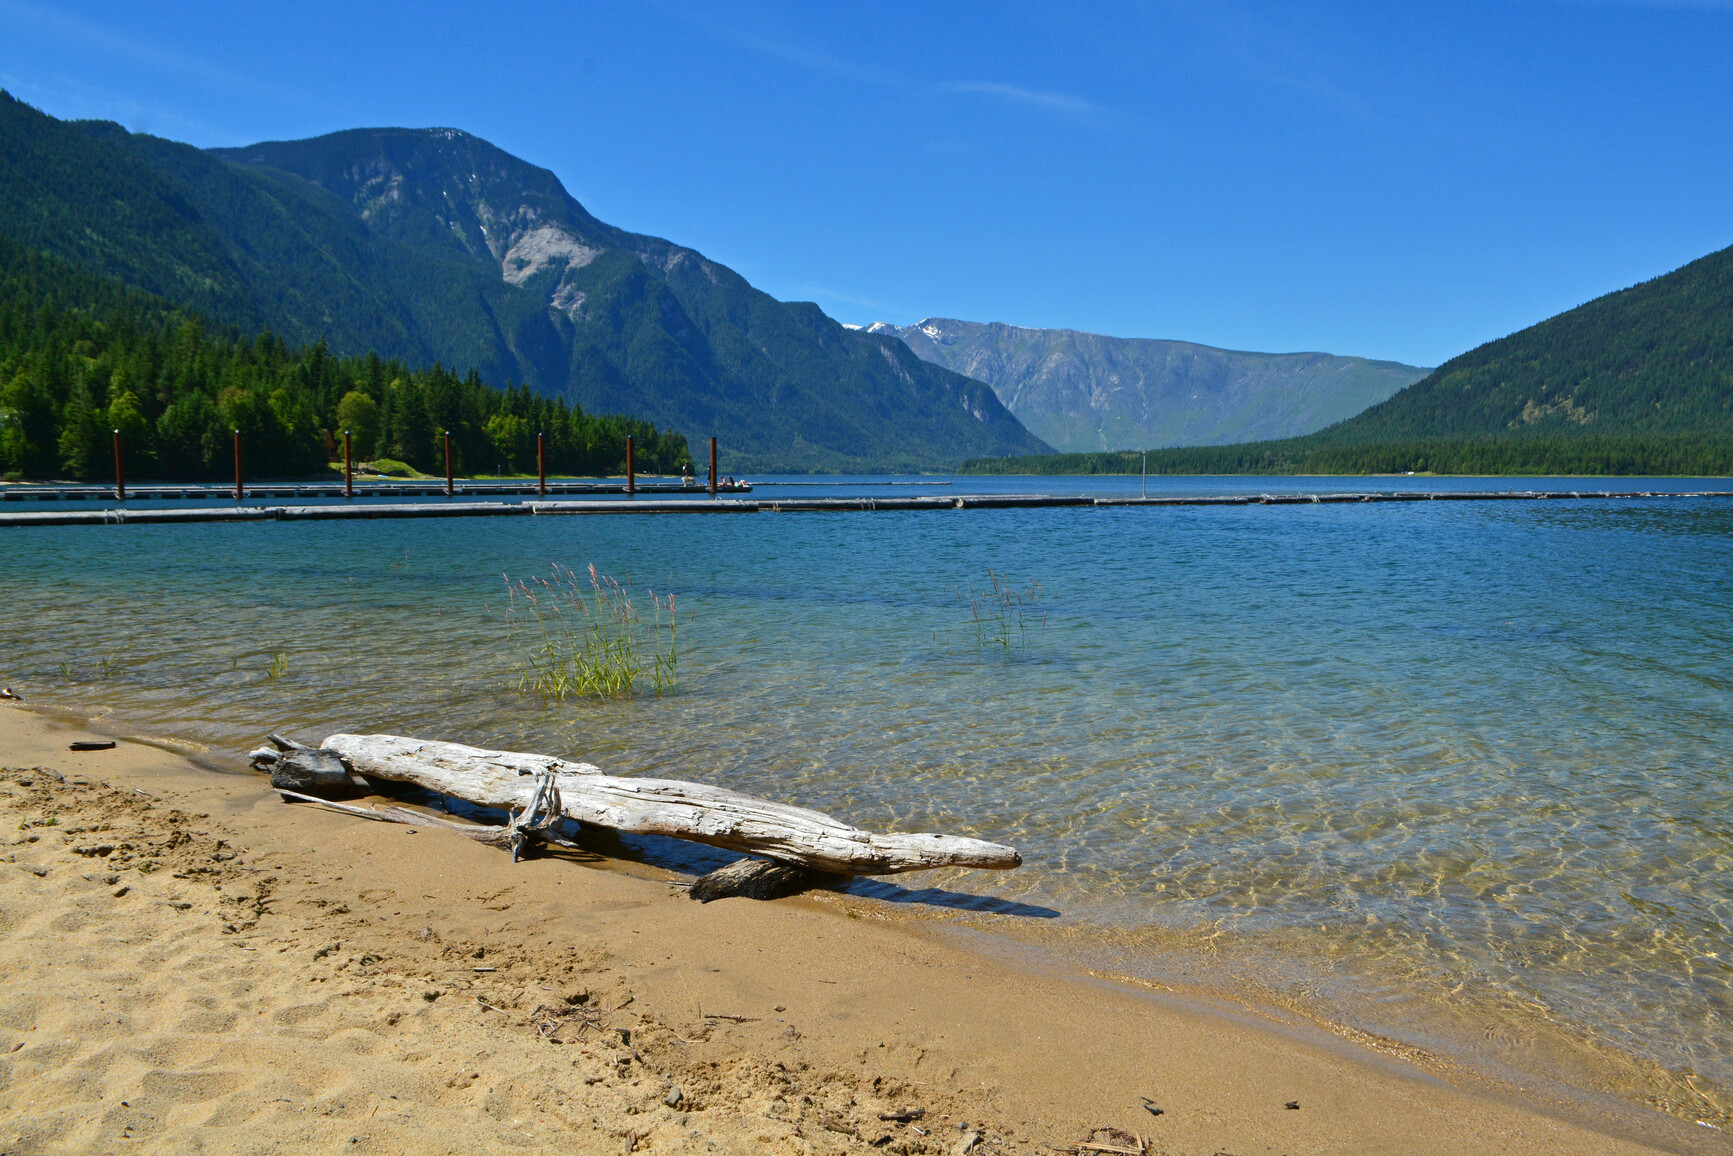 McDonald Creek Park, Upper Arrow Lake - A sandy beach at Arrow Lake with a piece of drift wood in the foreground. Trees, forest and mountains are in the background.